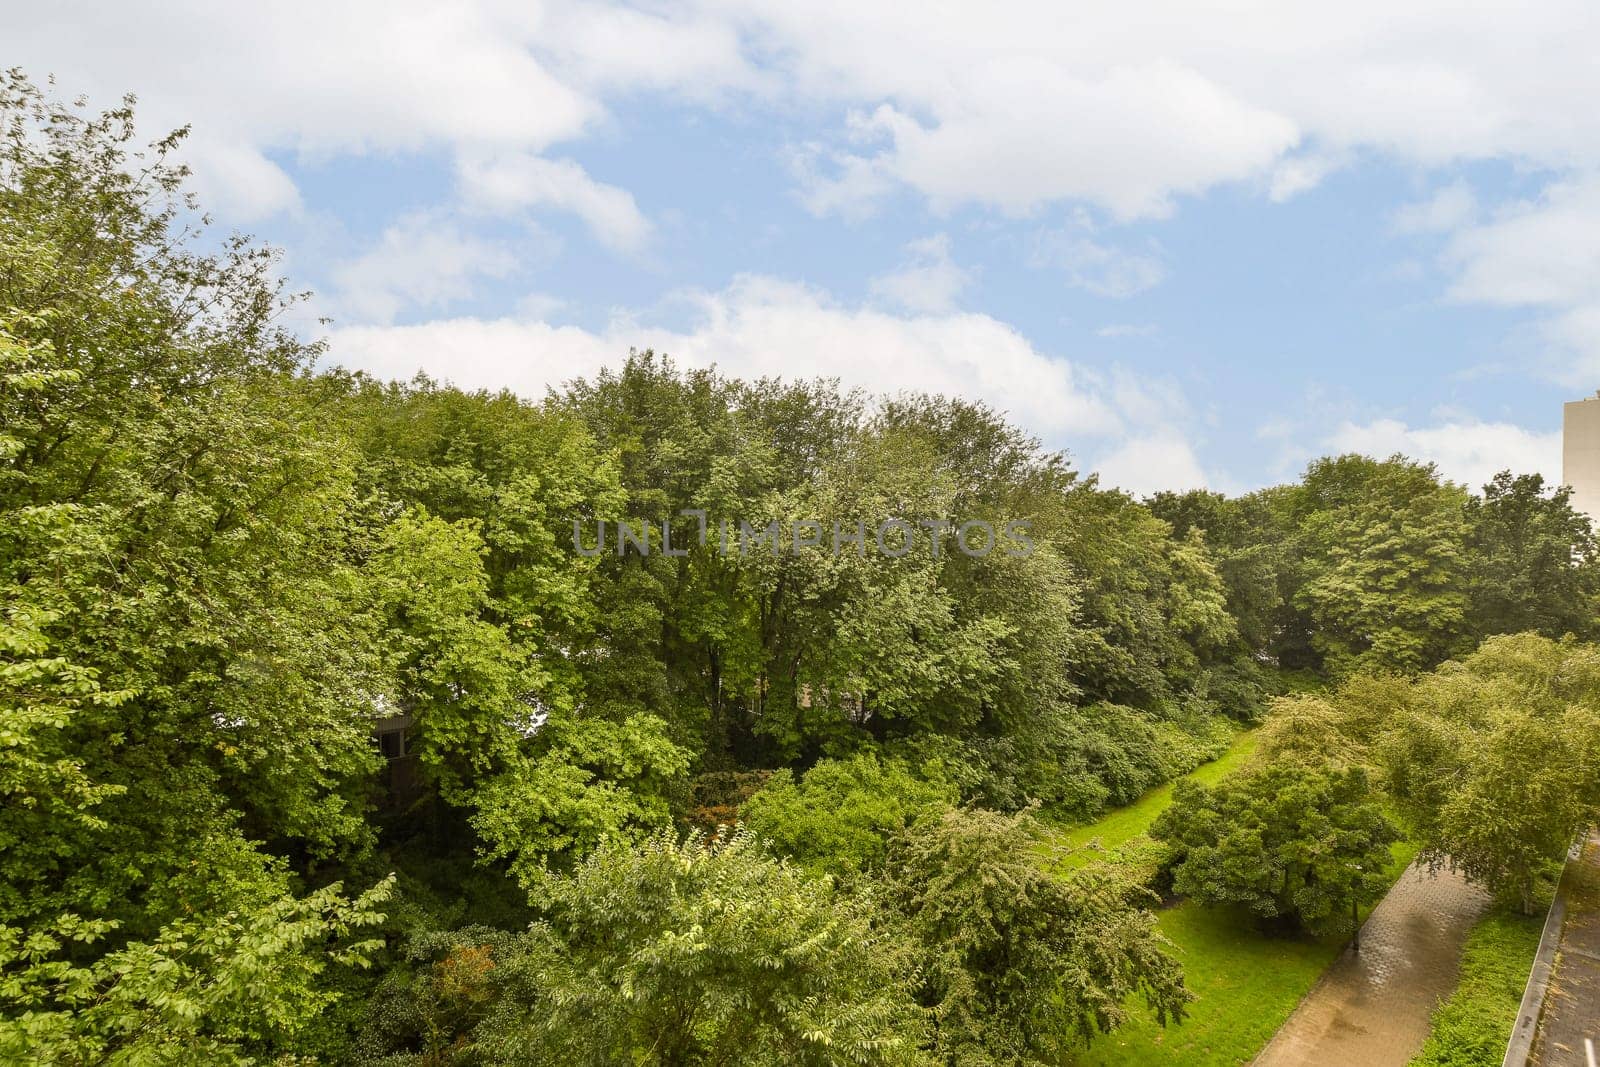 some trees and bushes in the park with a blue sky above it, taken from an aerial view point on a sunny day